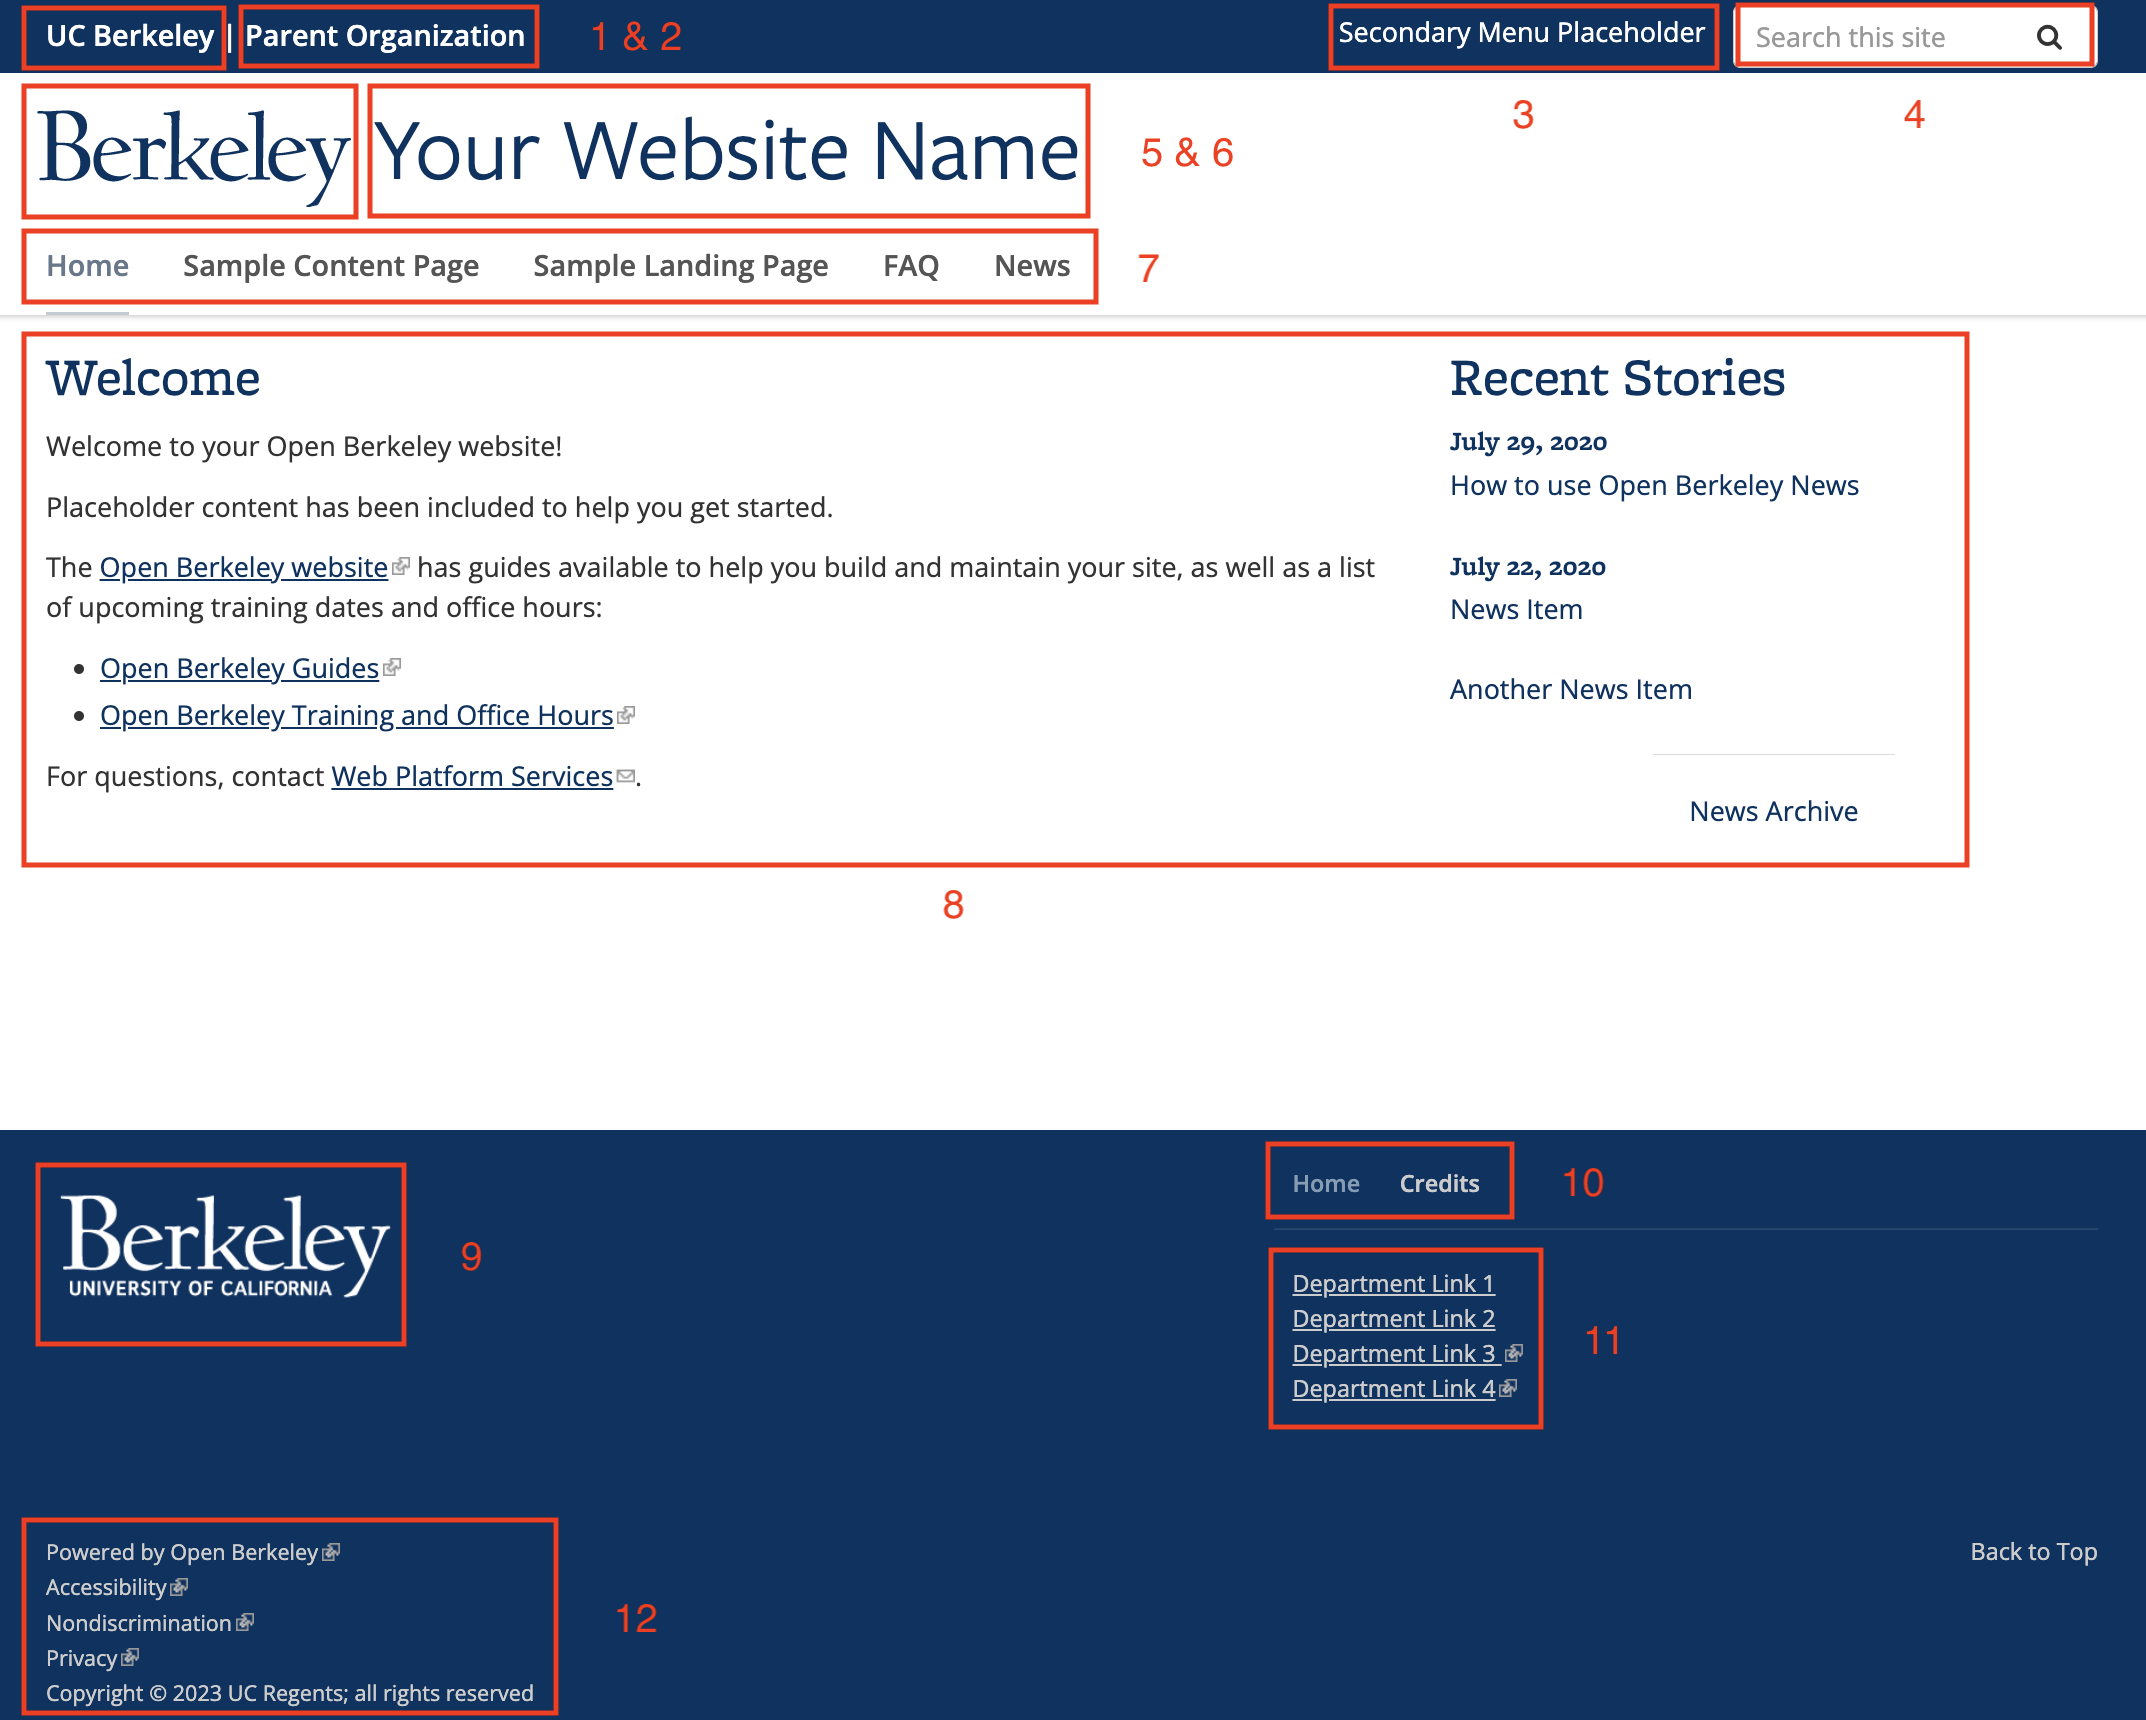 Screenshot of a typical Open Berkeley homepage with the primary elements highlighted and annotated